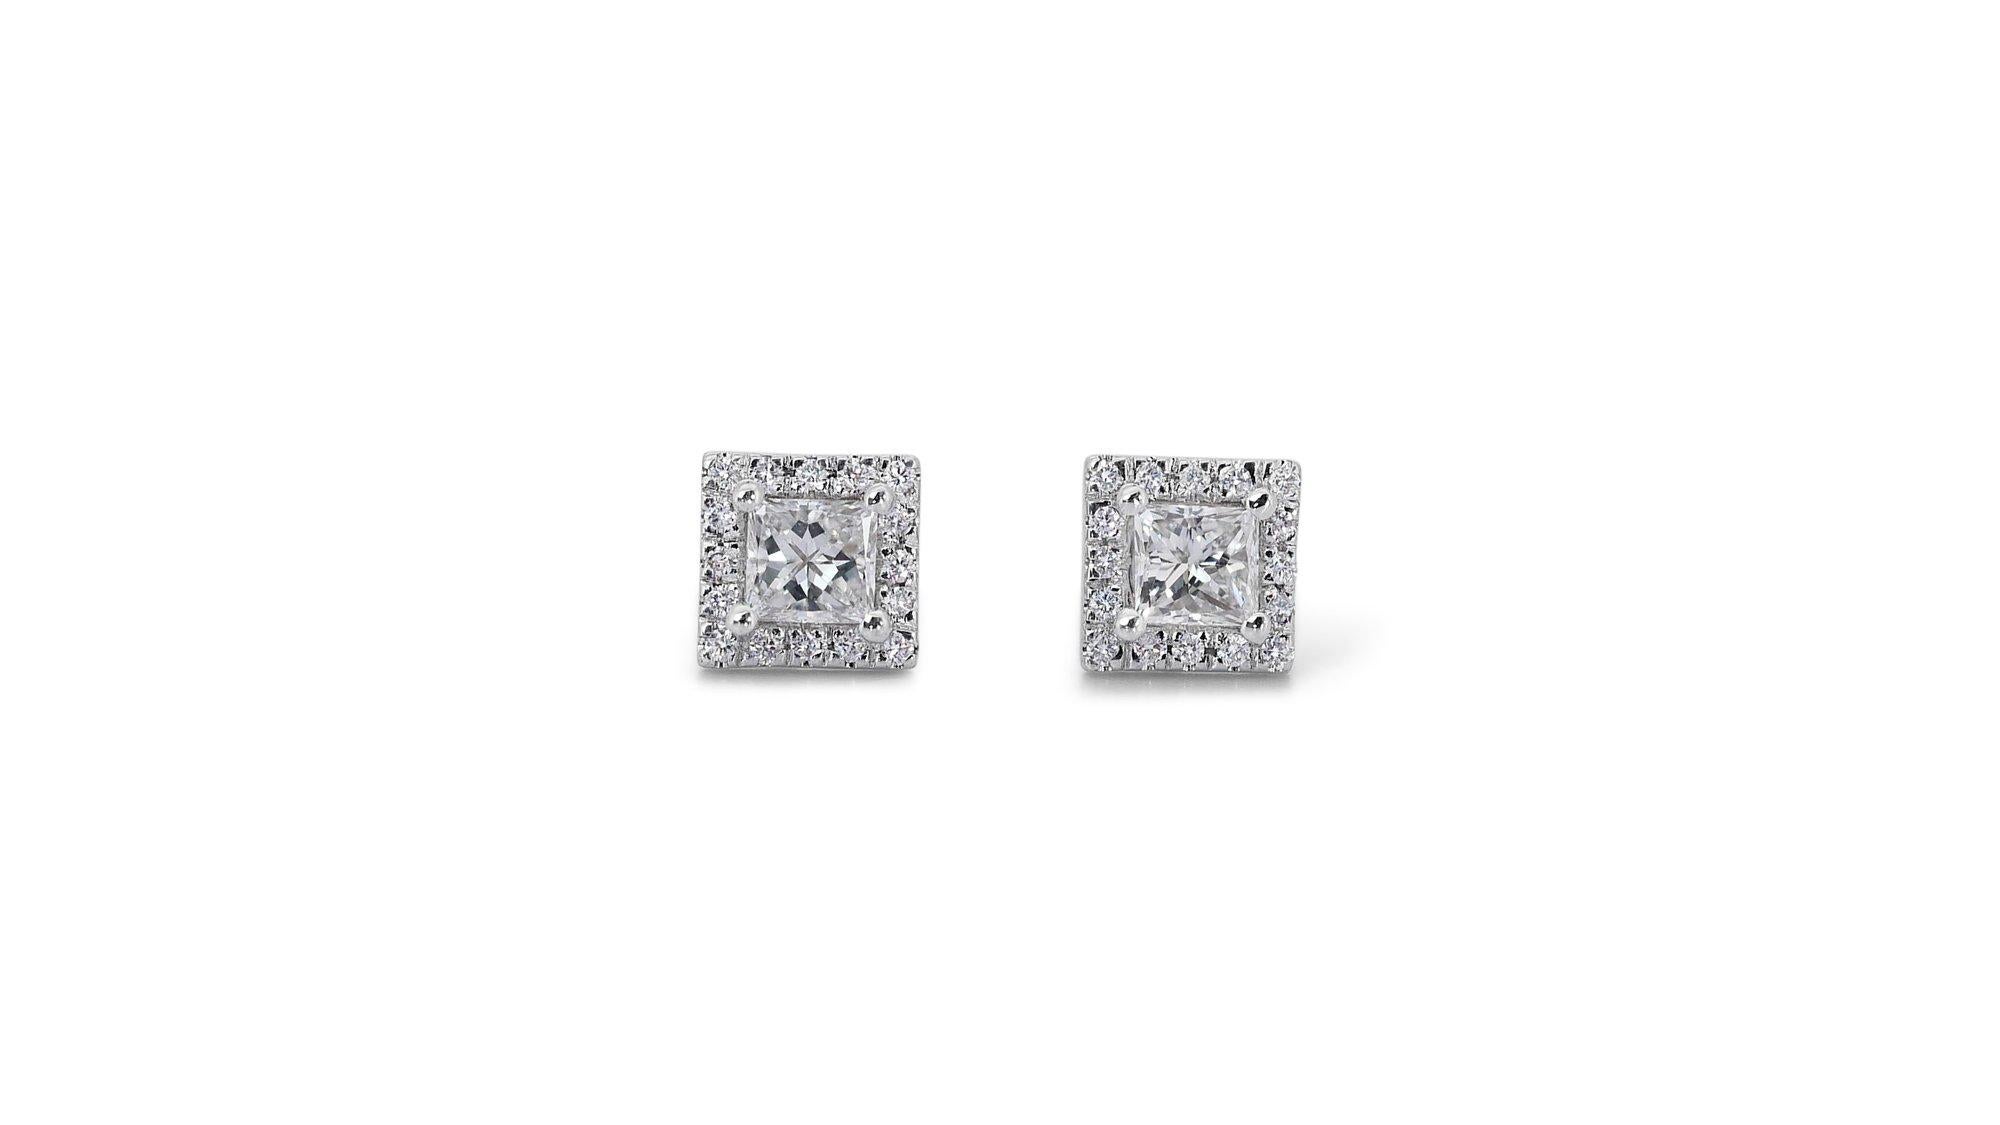 Stunning 2.37ct Diamond Stud Earrings in 18k White Gold - GIA Certified For Sale 4